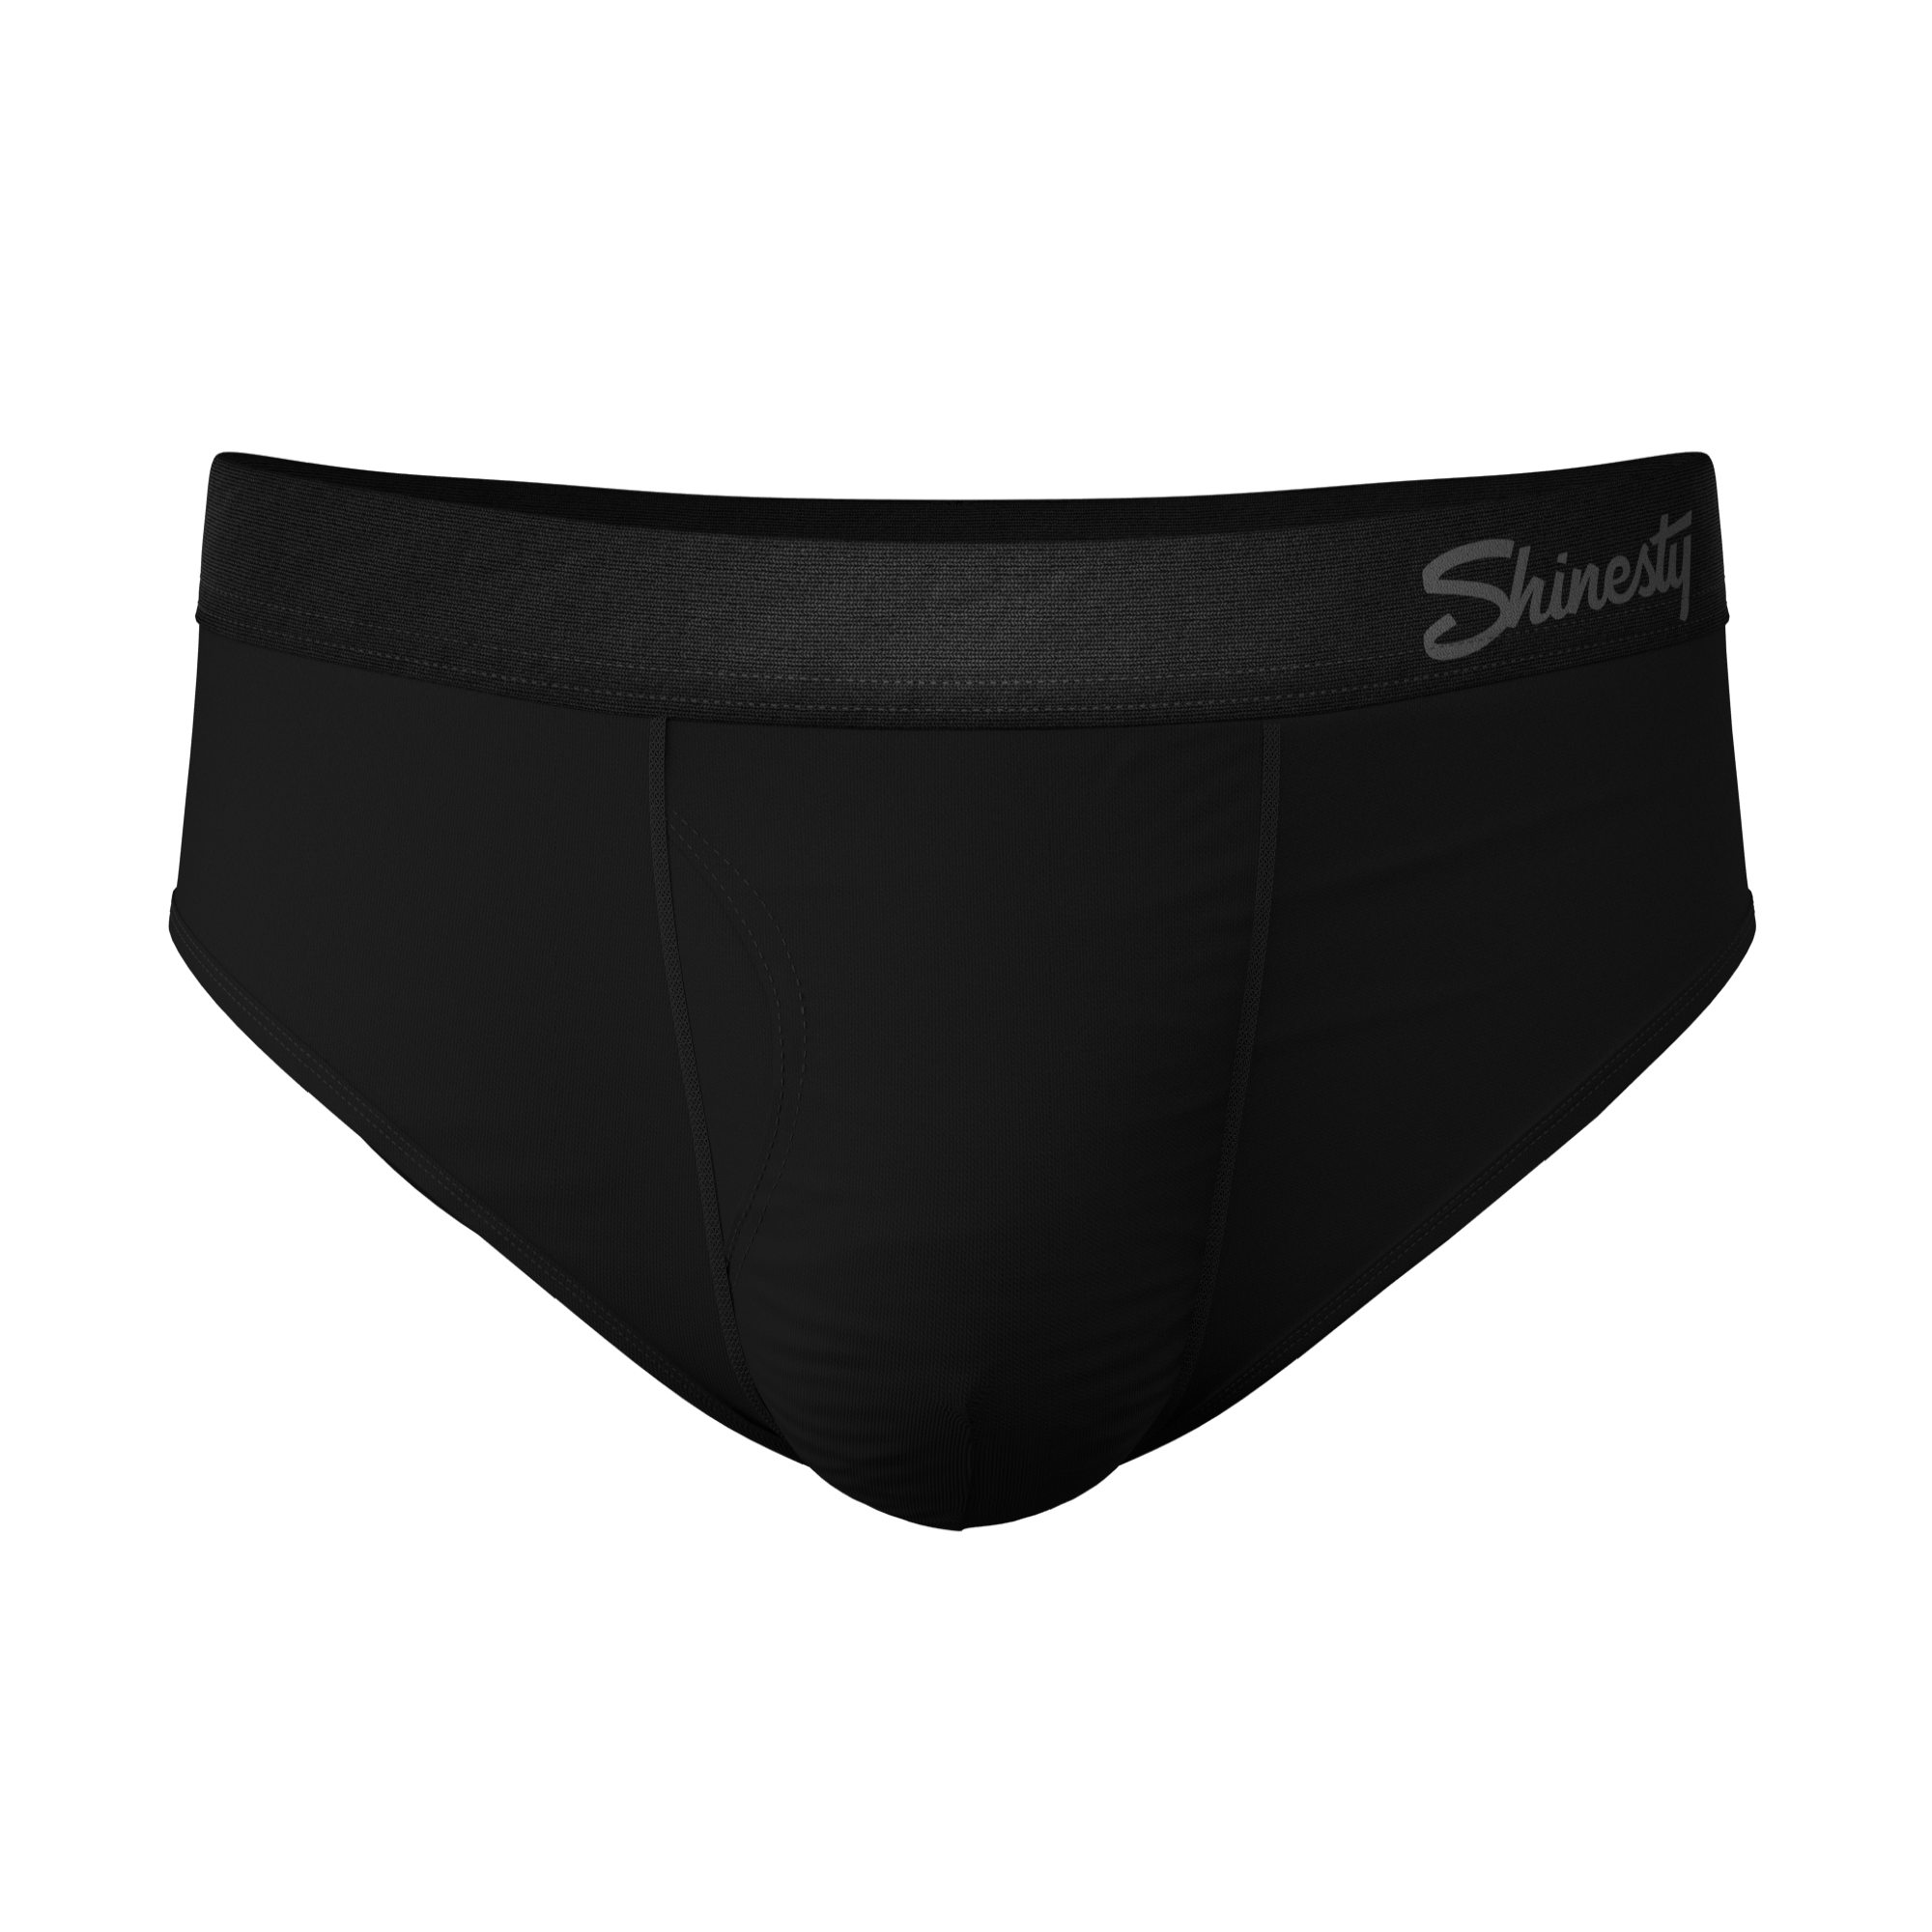 Men's Workout Shorts with Built-in Ball Hammock® Underwear by Shinesty